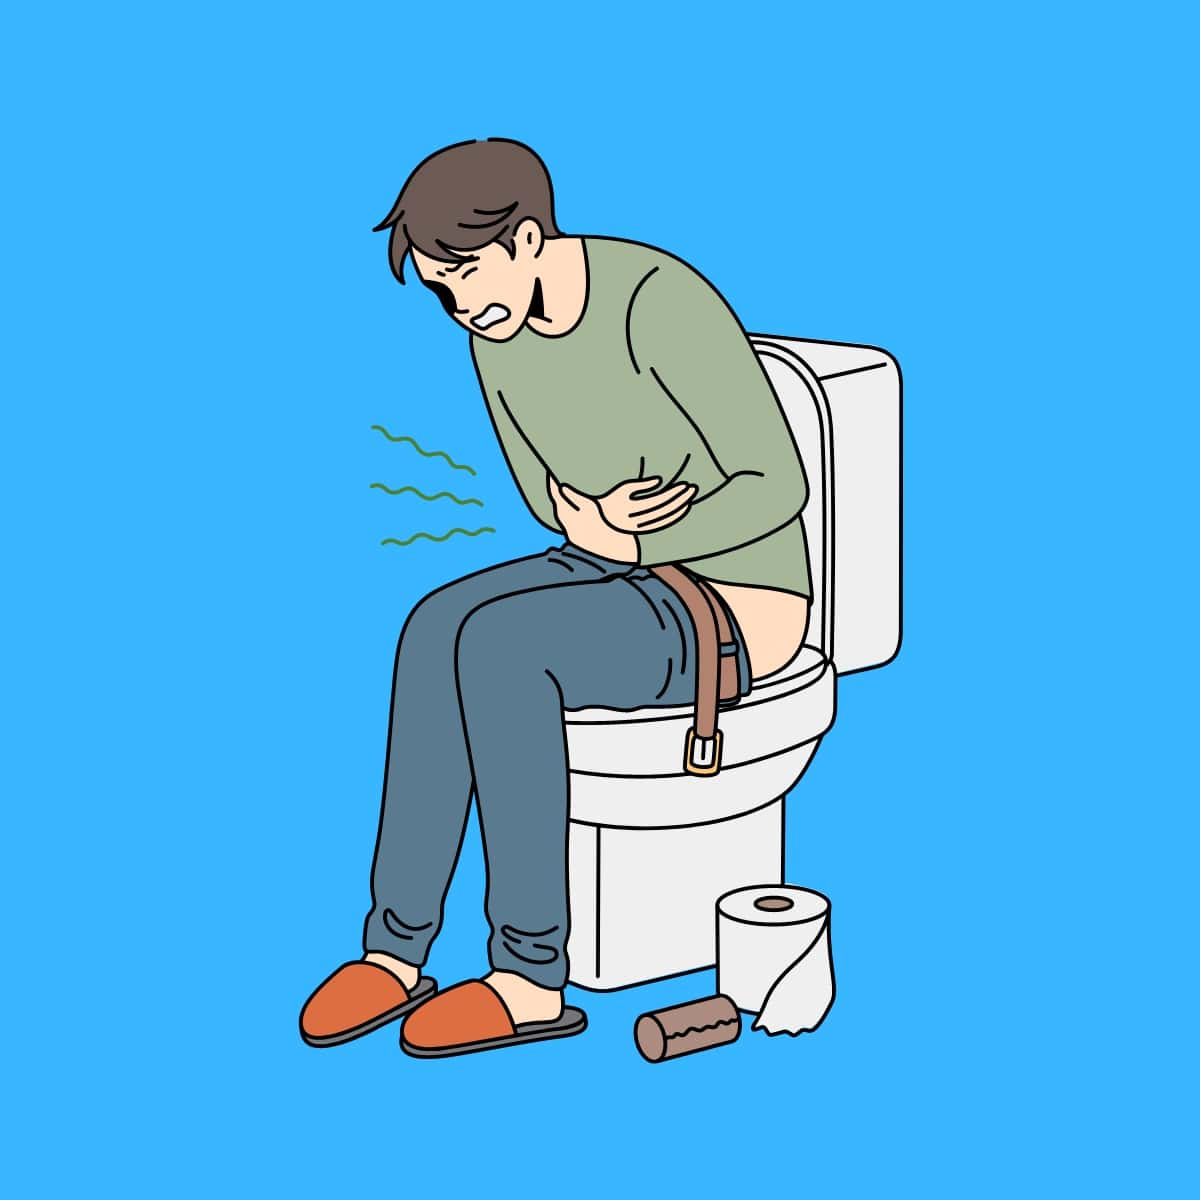 Cartoon graphic of a man holding his stomach and sitting on a toilet doing diarrhea on a blue background.